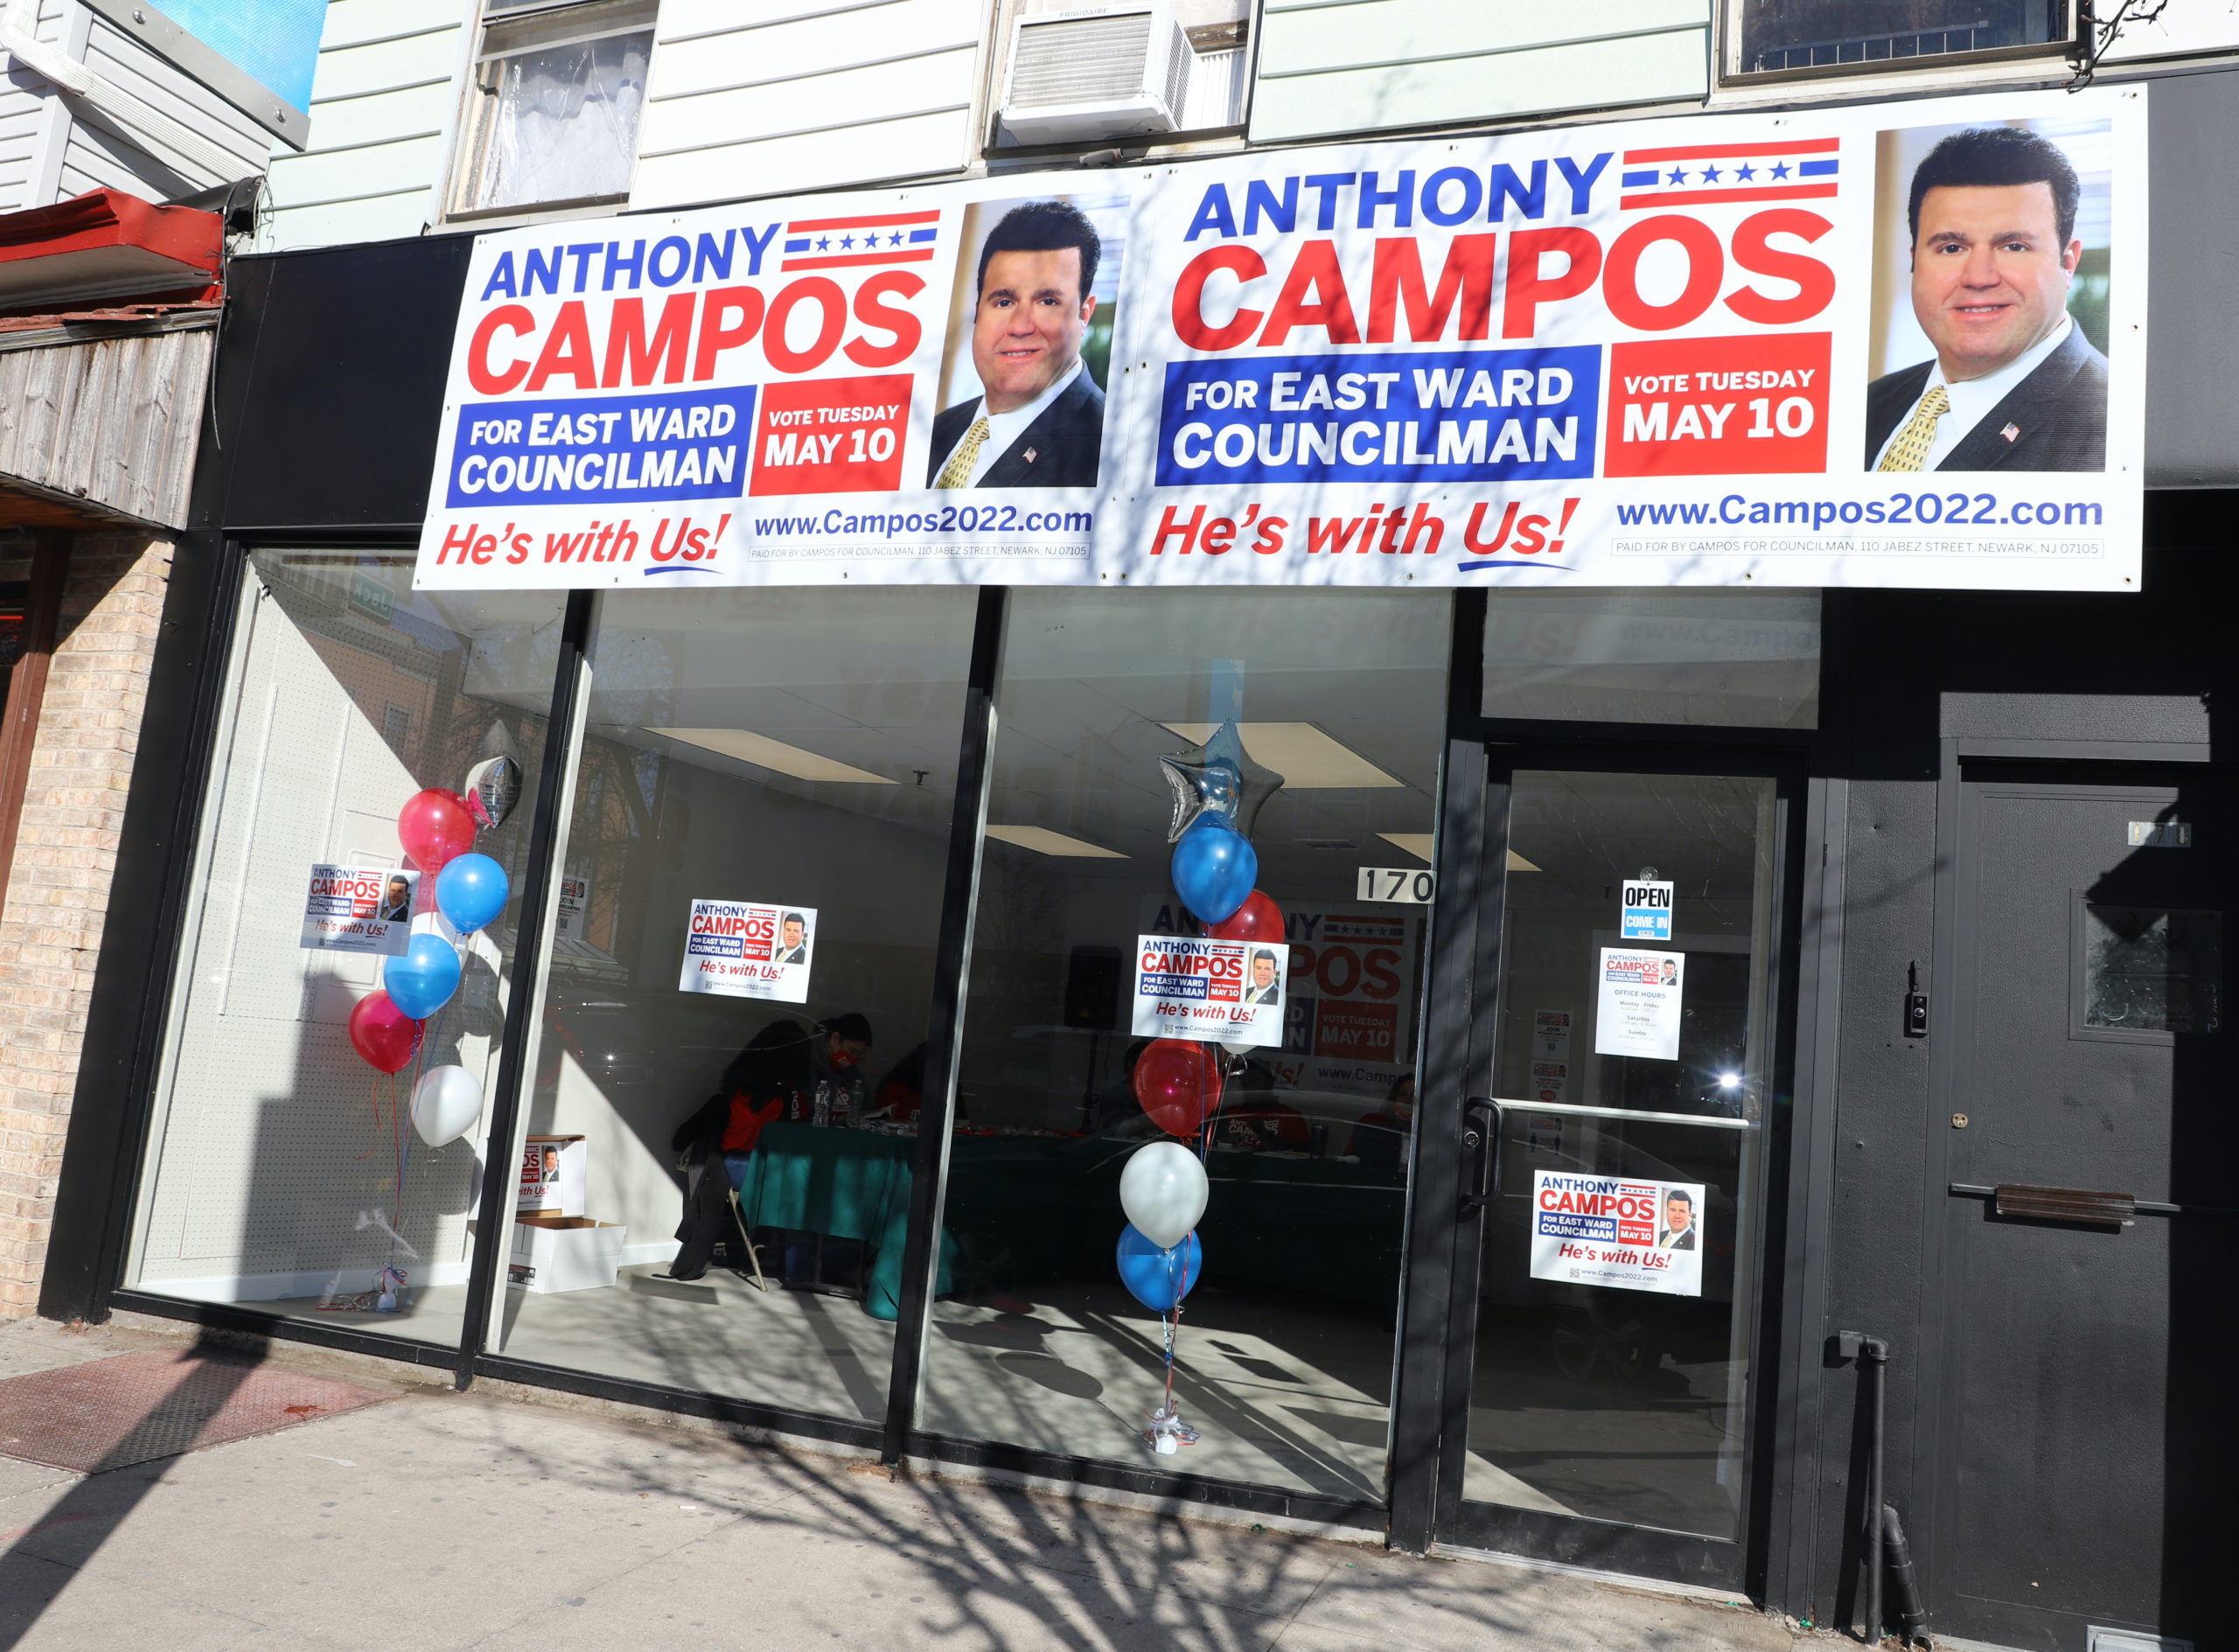 Luso Americano Portuguese Article - Anthony Campos for East Ward Councilman